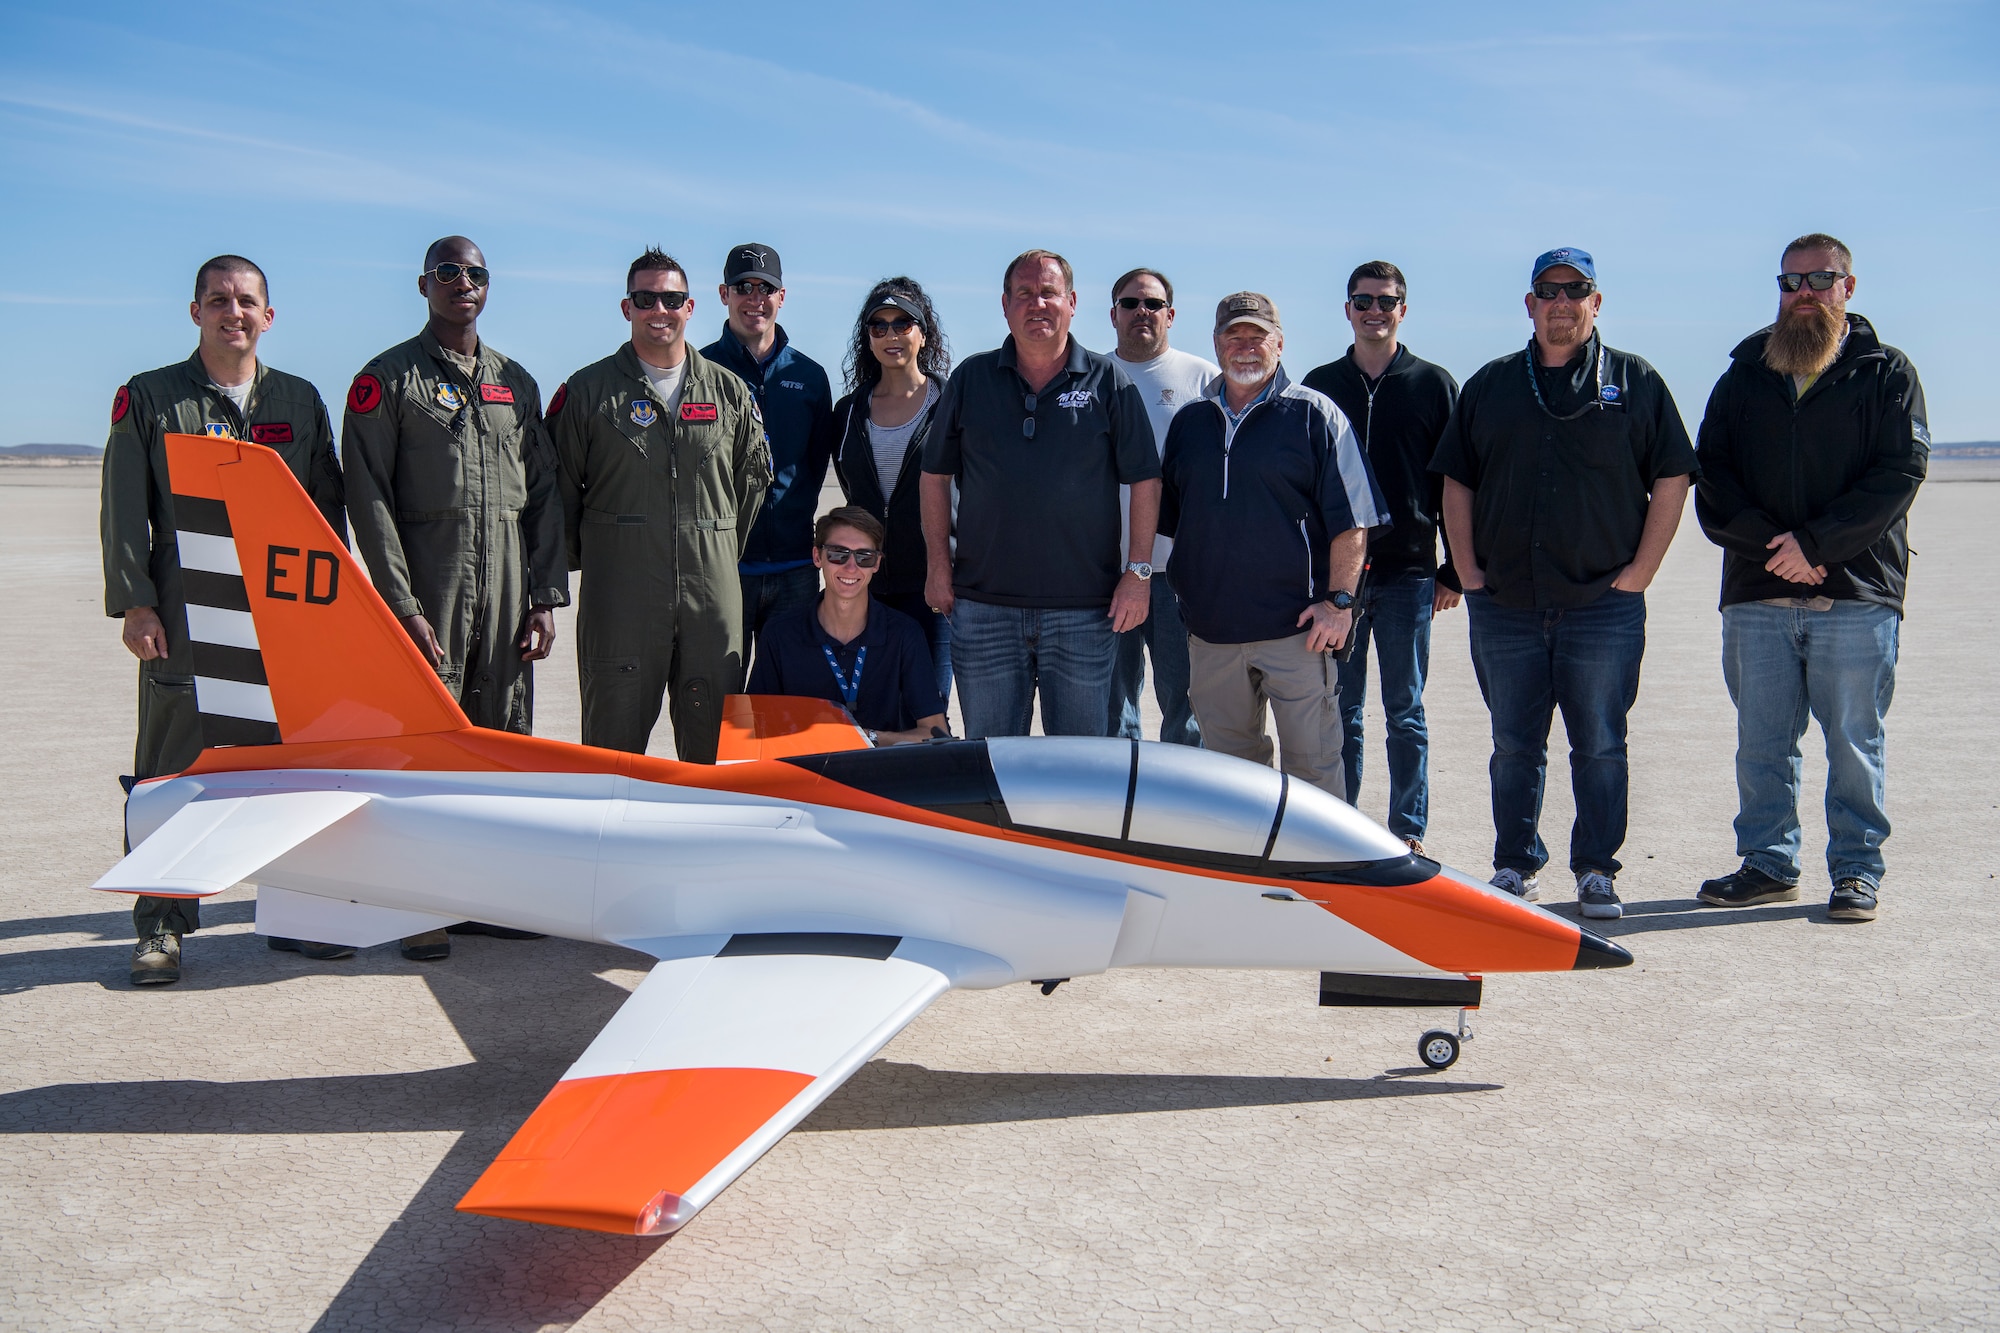 The 412th Test Wing’s Emerging Technology Combined Test Force team pose for a photo with their Bob Violett Models “Renegade” aircraft following a test flight at Edwards Air Force Base, California, March 4. (Air Force photo by Chris Dyer)